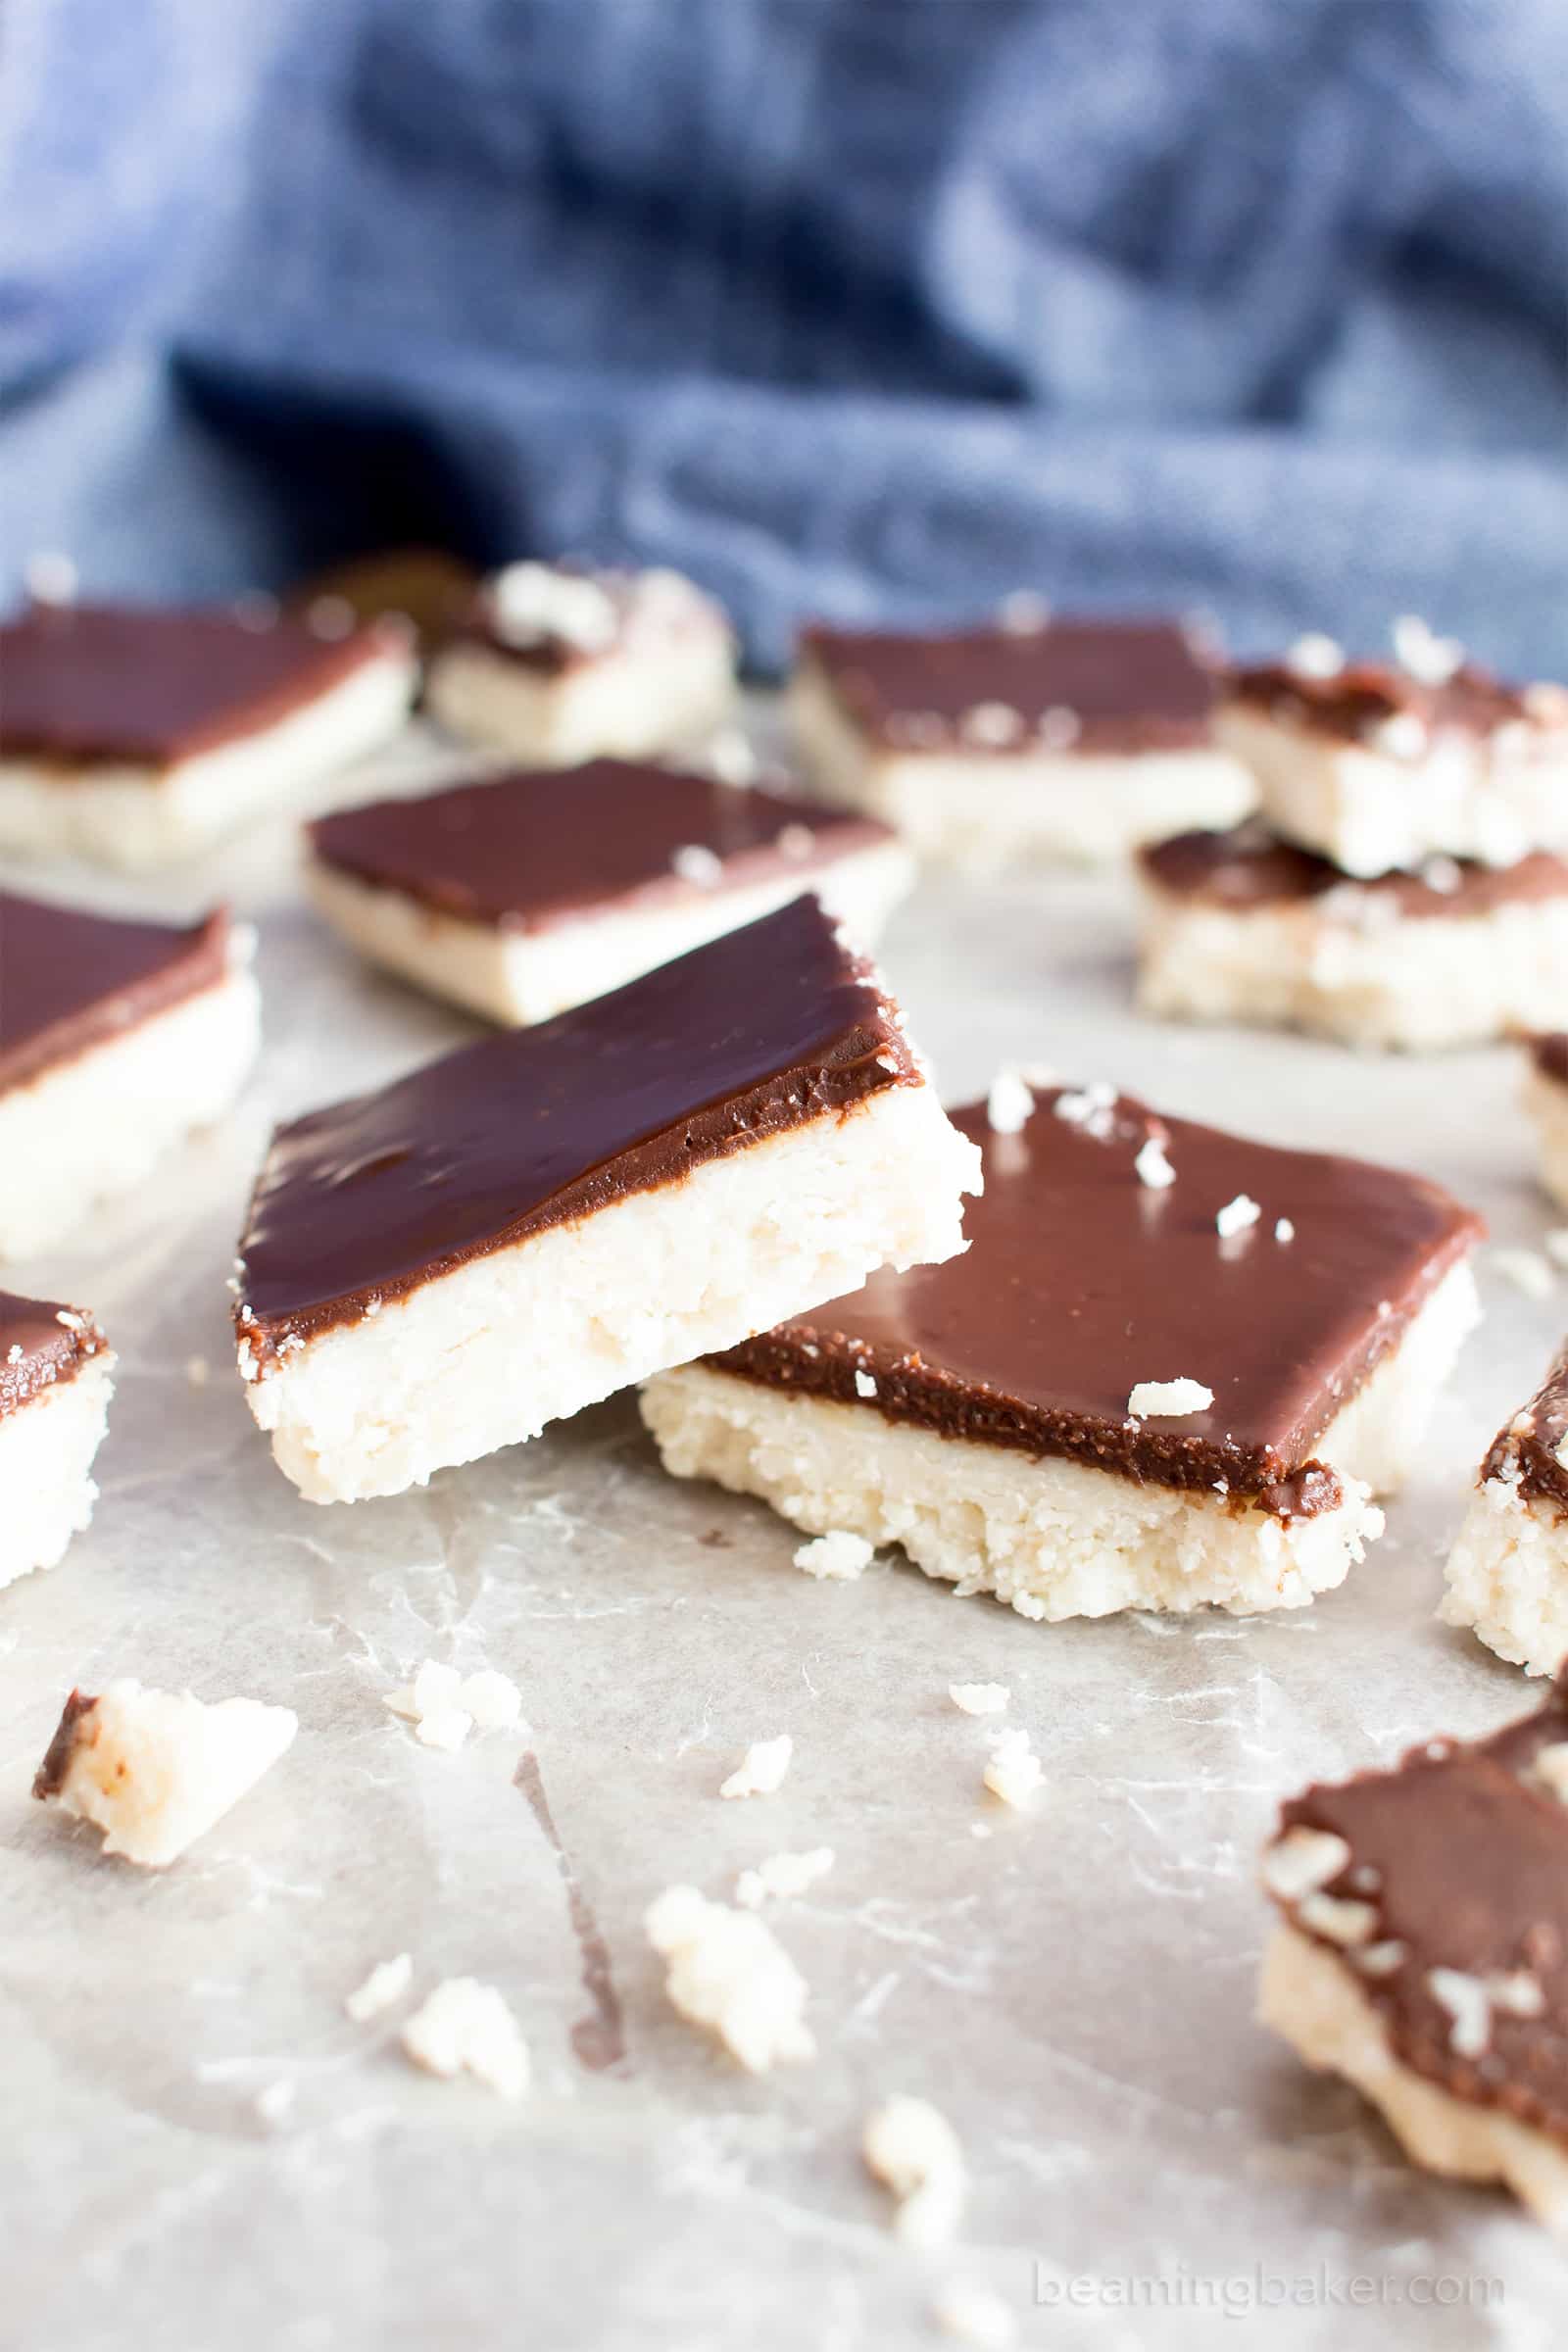 The Best Vegan Candy and Chocolate Recipes (GF): satisfy your sweet tooth with these irresistible homemade vegan candy recipes! The best vegan chocolate candy—gluten-free and healthy! #Vegan #GlutenFree #Candy #Chocolate | Recipes at BeamingBaker.com